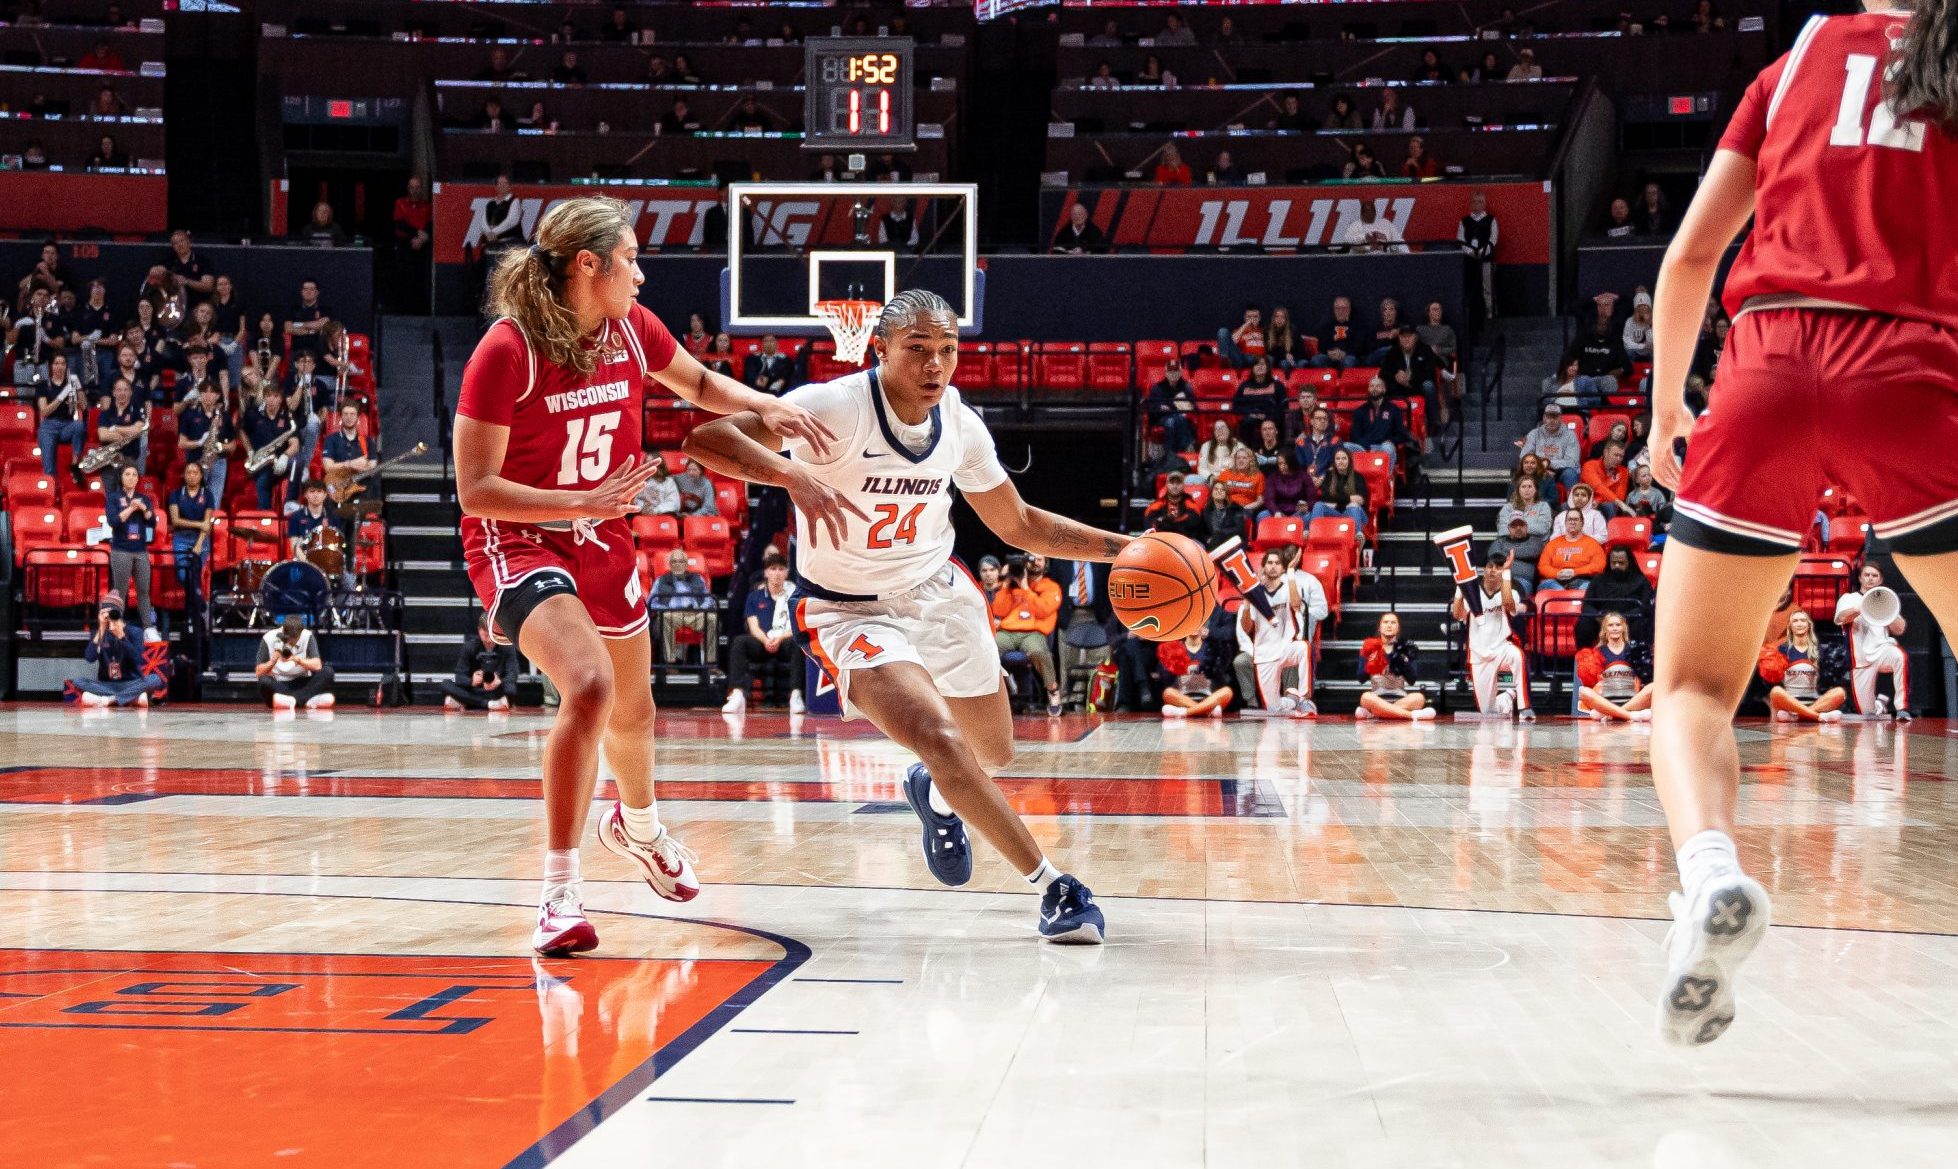 Still Searching For First Big Win - Illini Fall in Disappointing Fashion 67-61 to Wisconsin